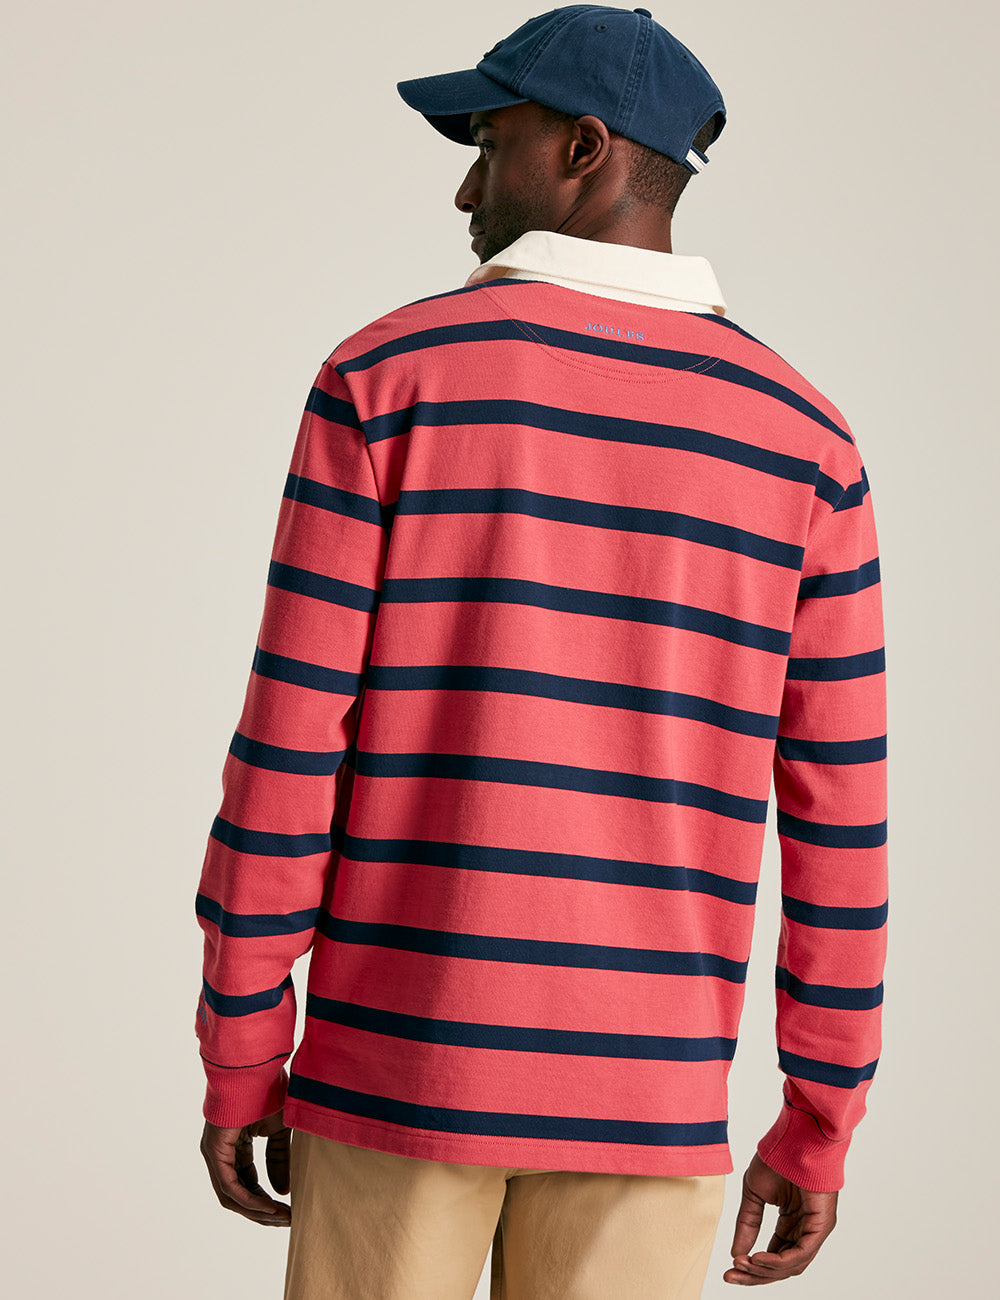 Joules Onside Rugby Shirt - Pink/Navy Stripe